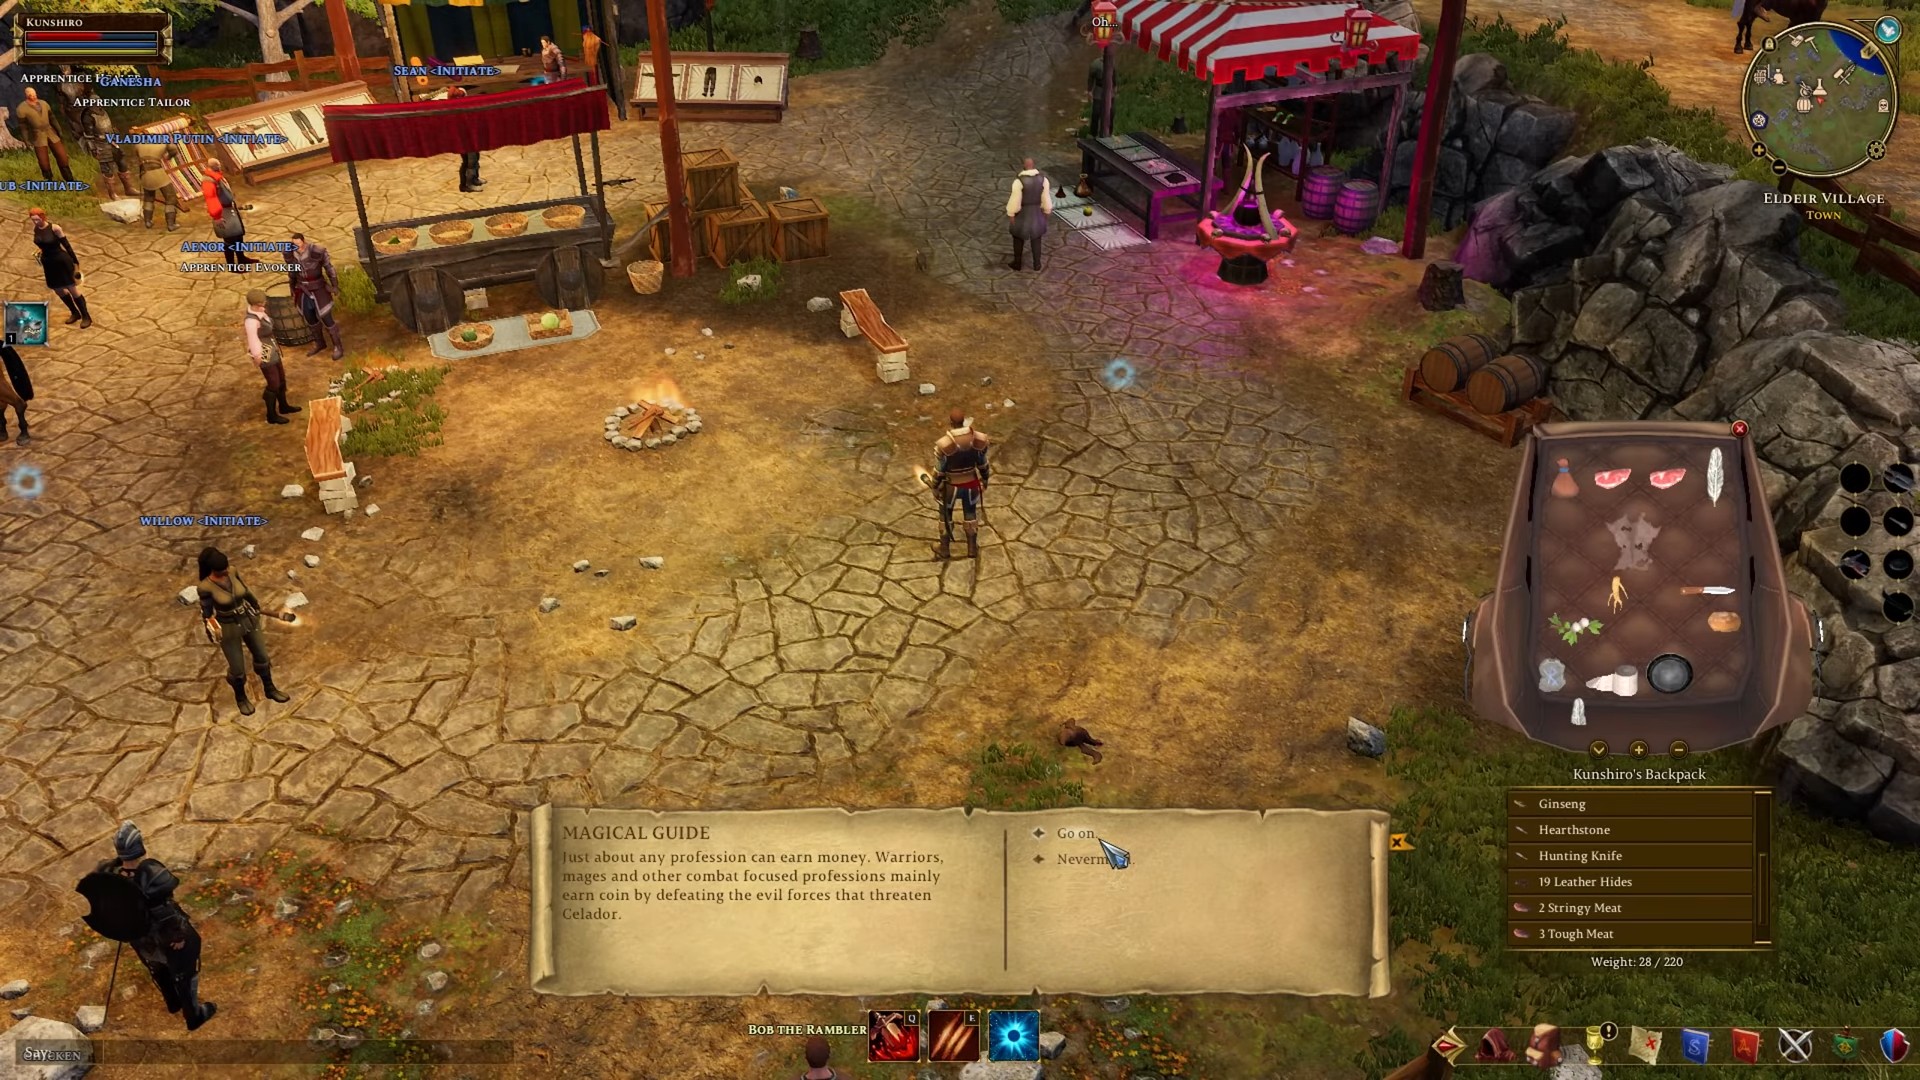 Classic MMO RuneScape is getting a board game and tabletop RPG